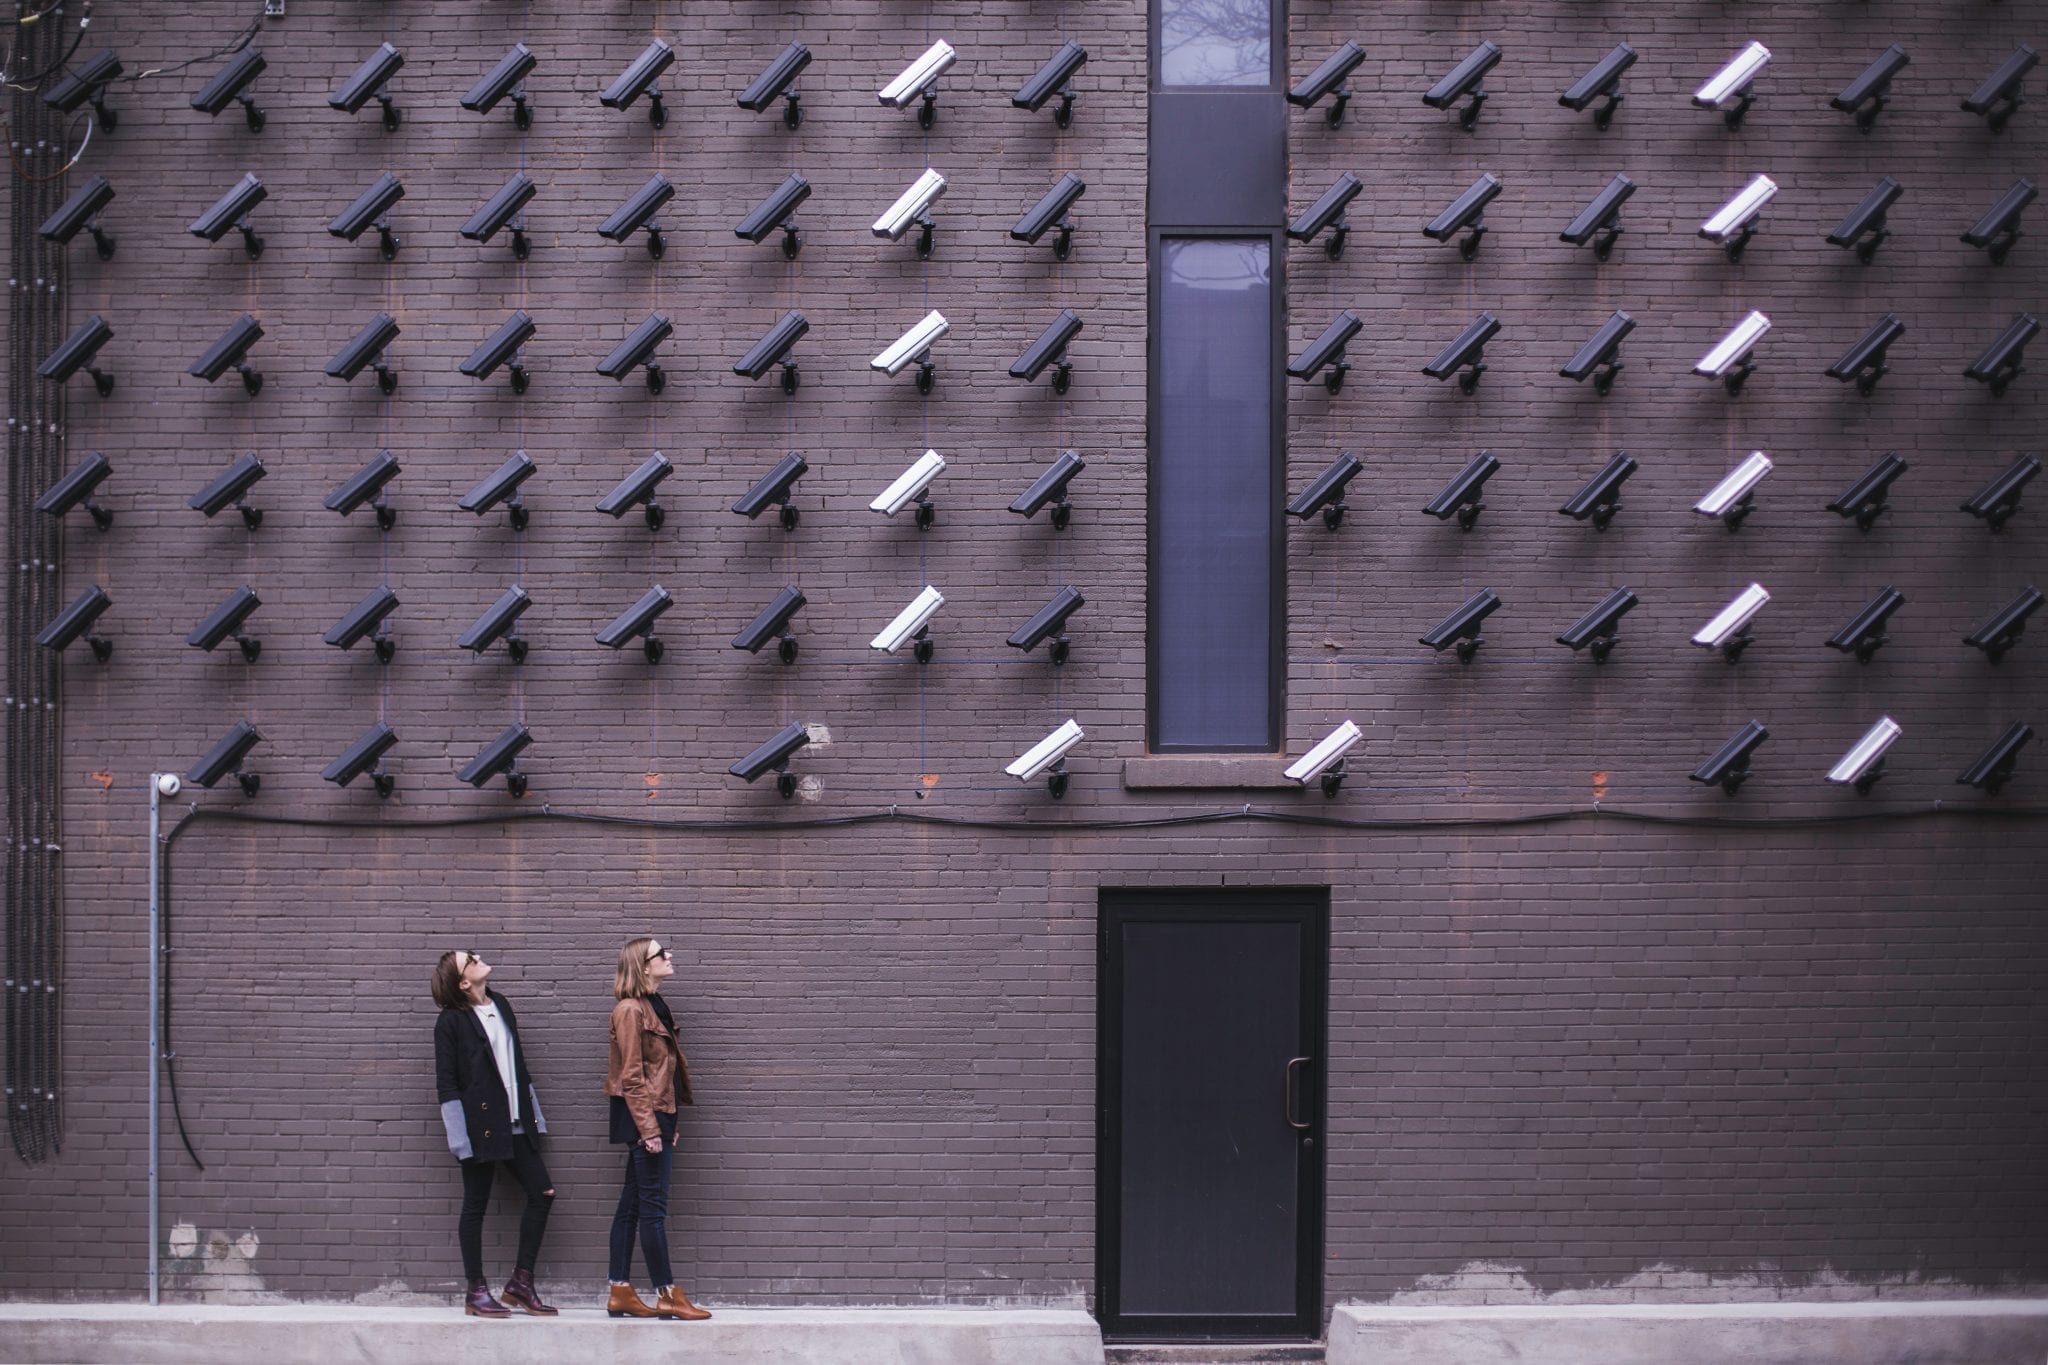 Multiple cameras tracking two women outside a building; image by matthew henry 87142 via unsplash.